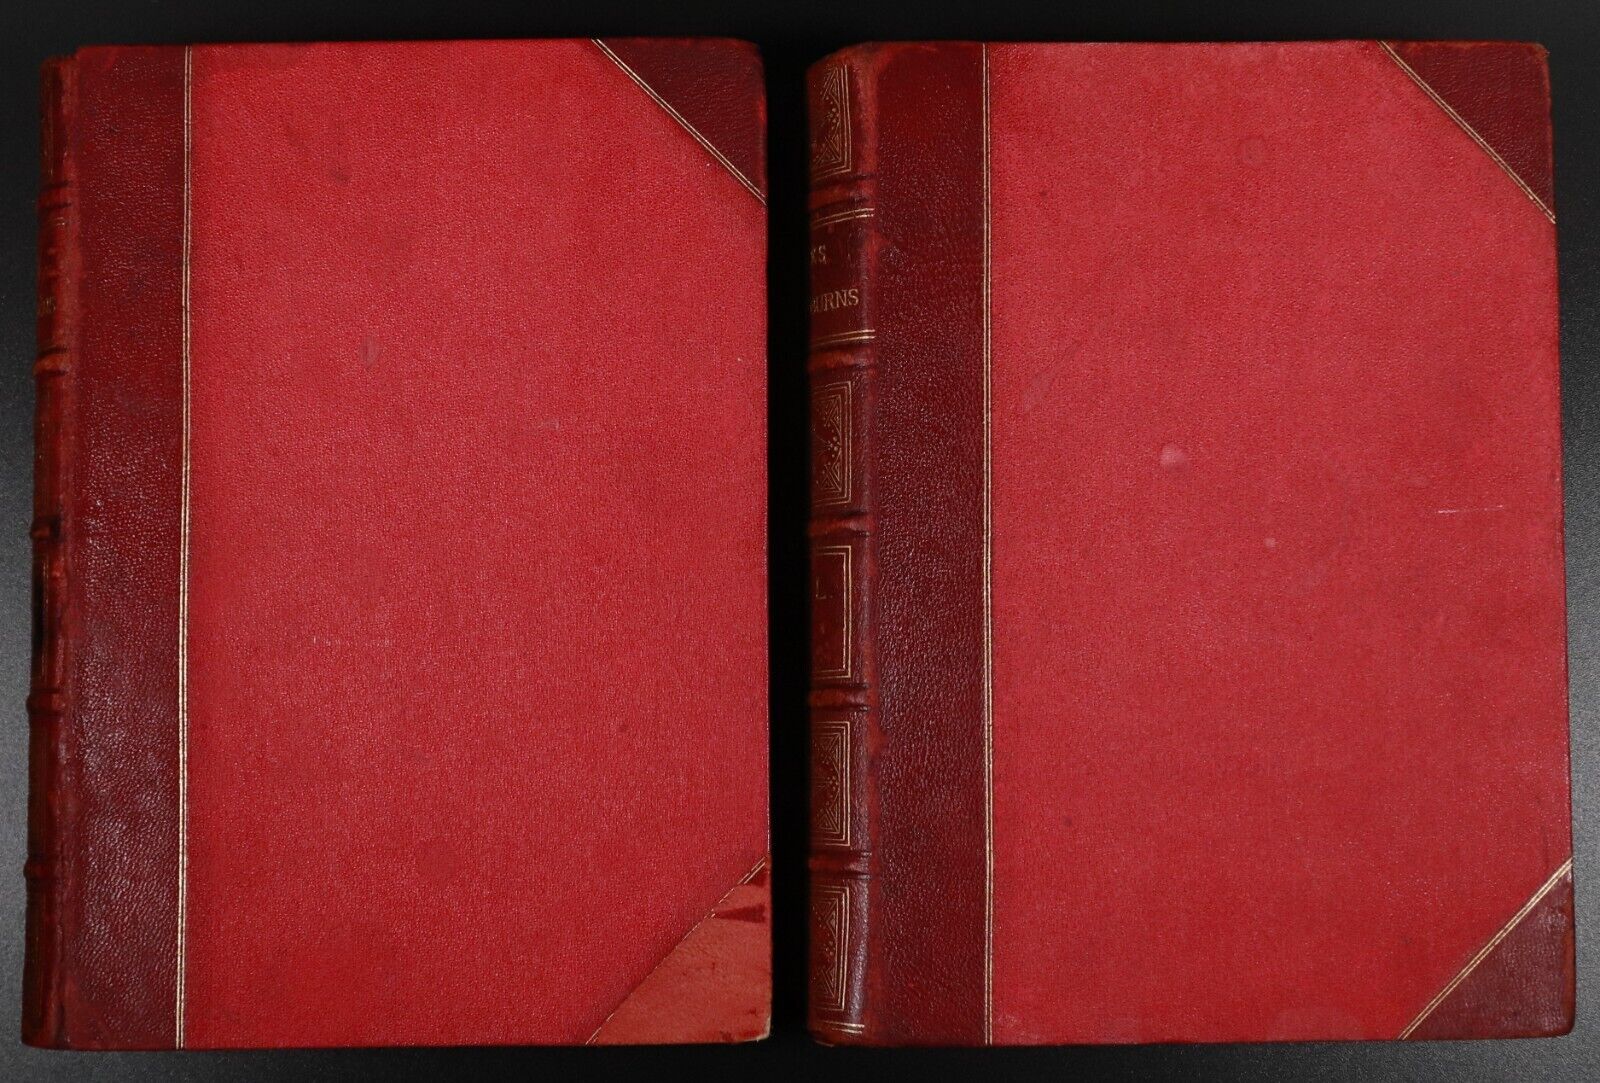 c1890 2vol The Works Of Robert Burns by William Wallace Antique Poetry Book Set